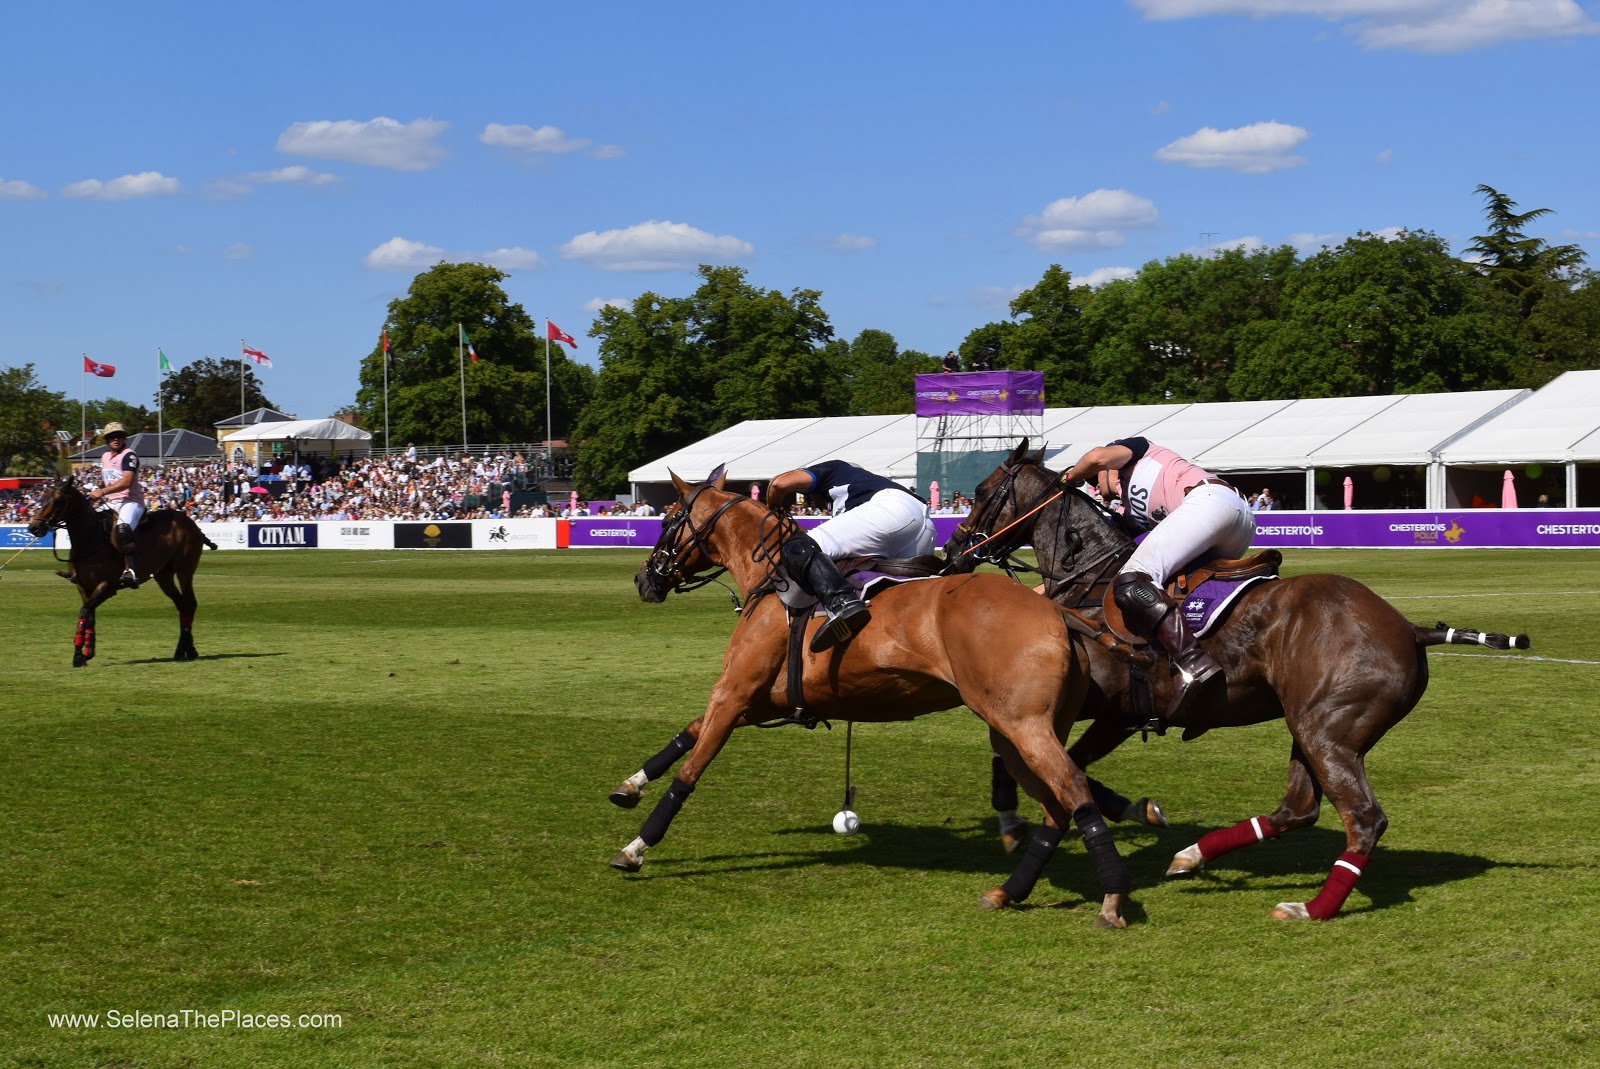 Chestertons Polo in the Park